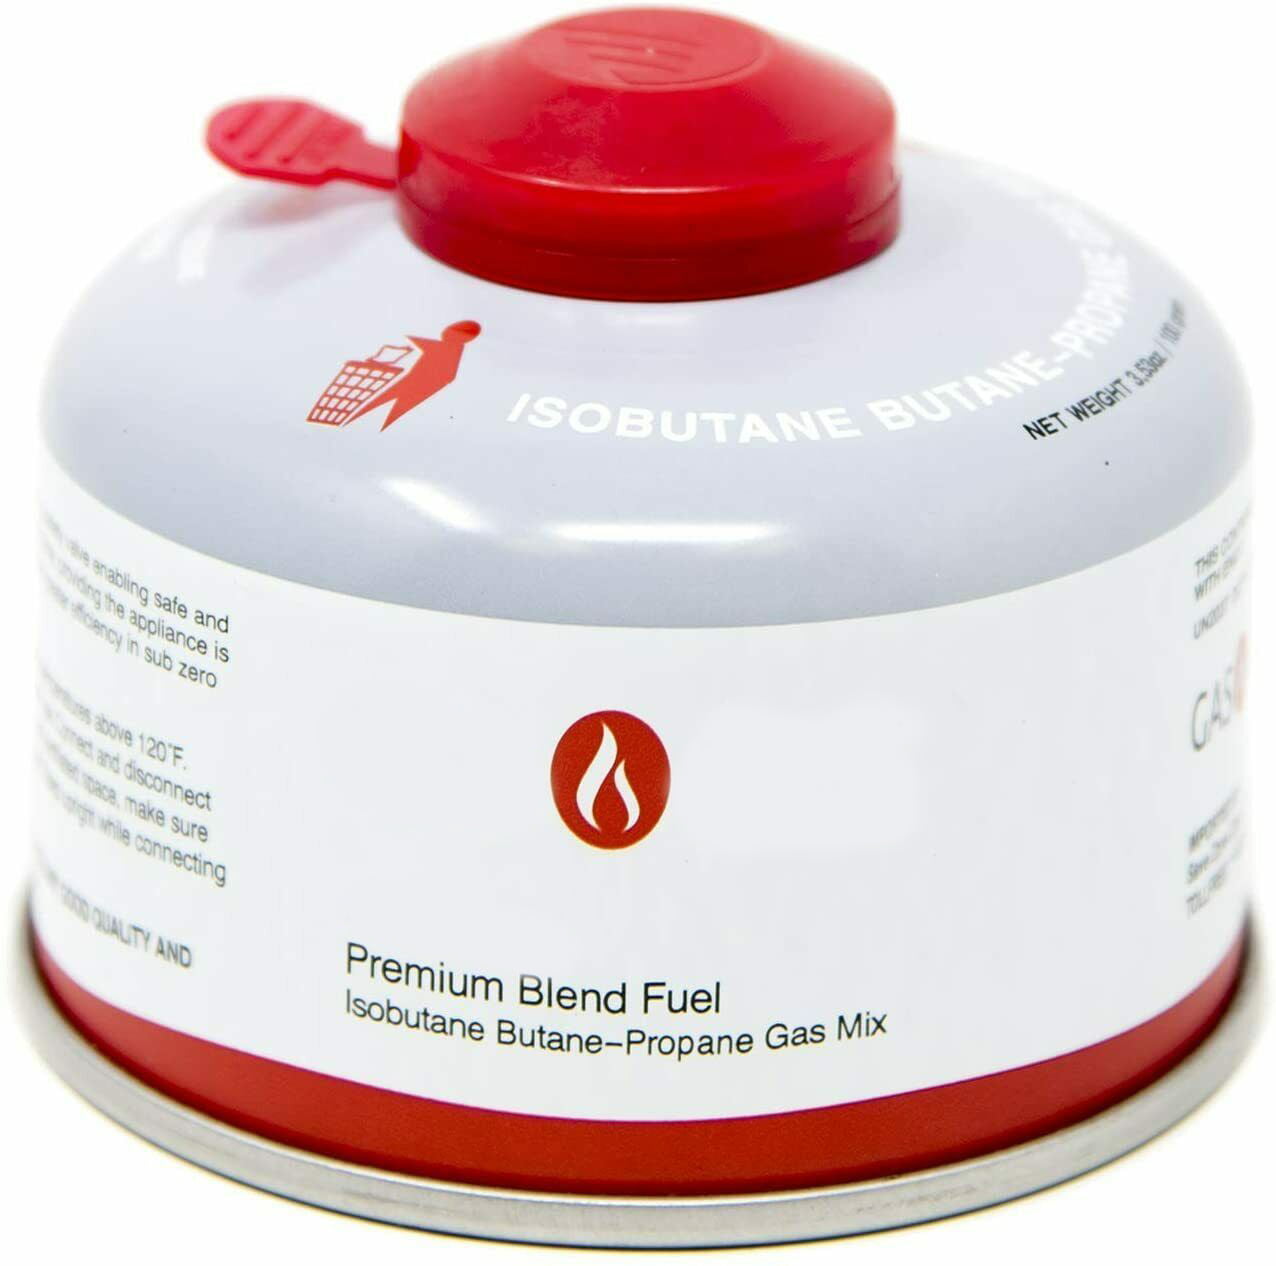 100G 4oz Isobutane Butane-Propane Fuel Blend Canister Can Camping Cooking Stove Hiking